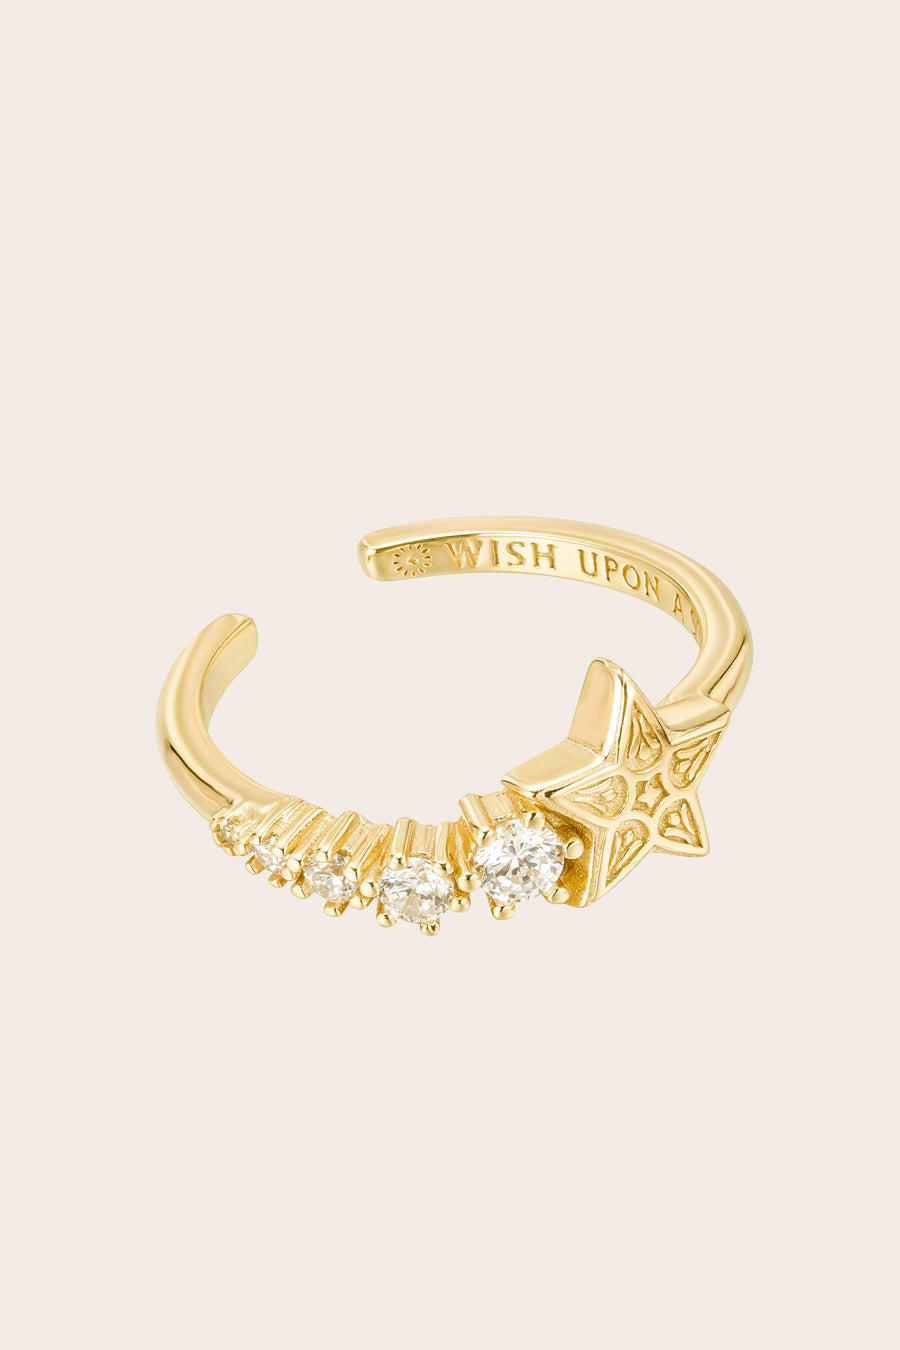 Gold shooting star ring on cream background